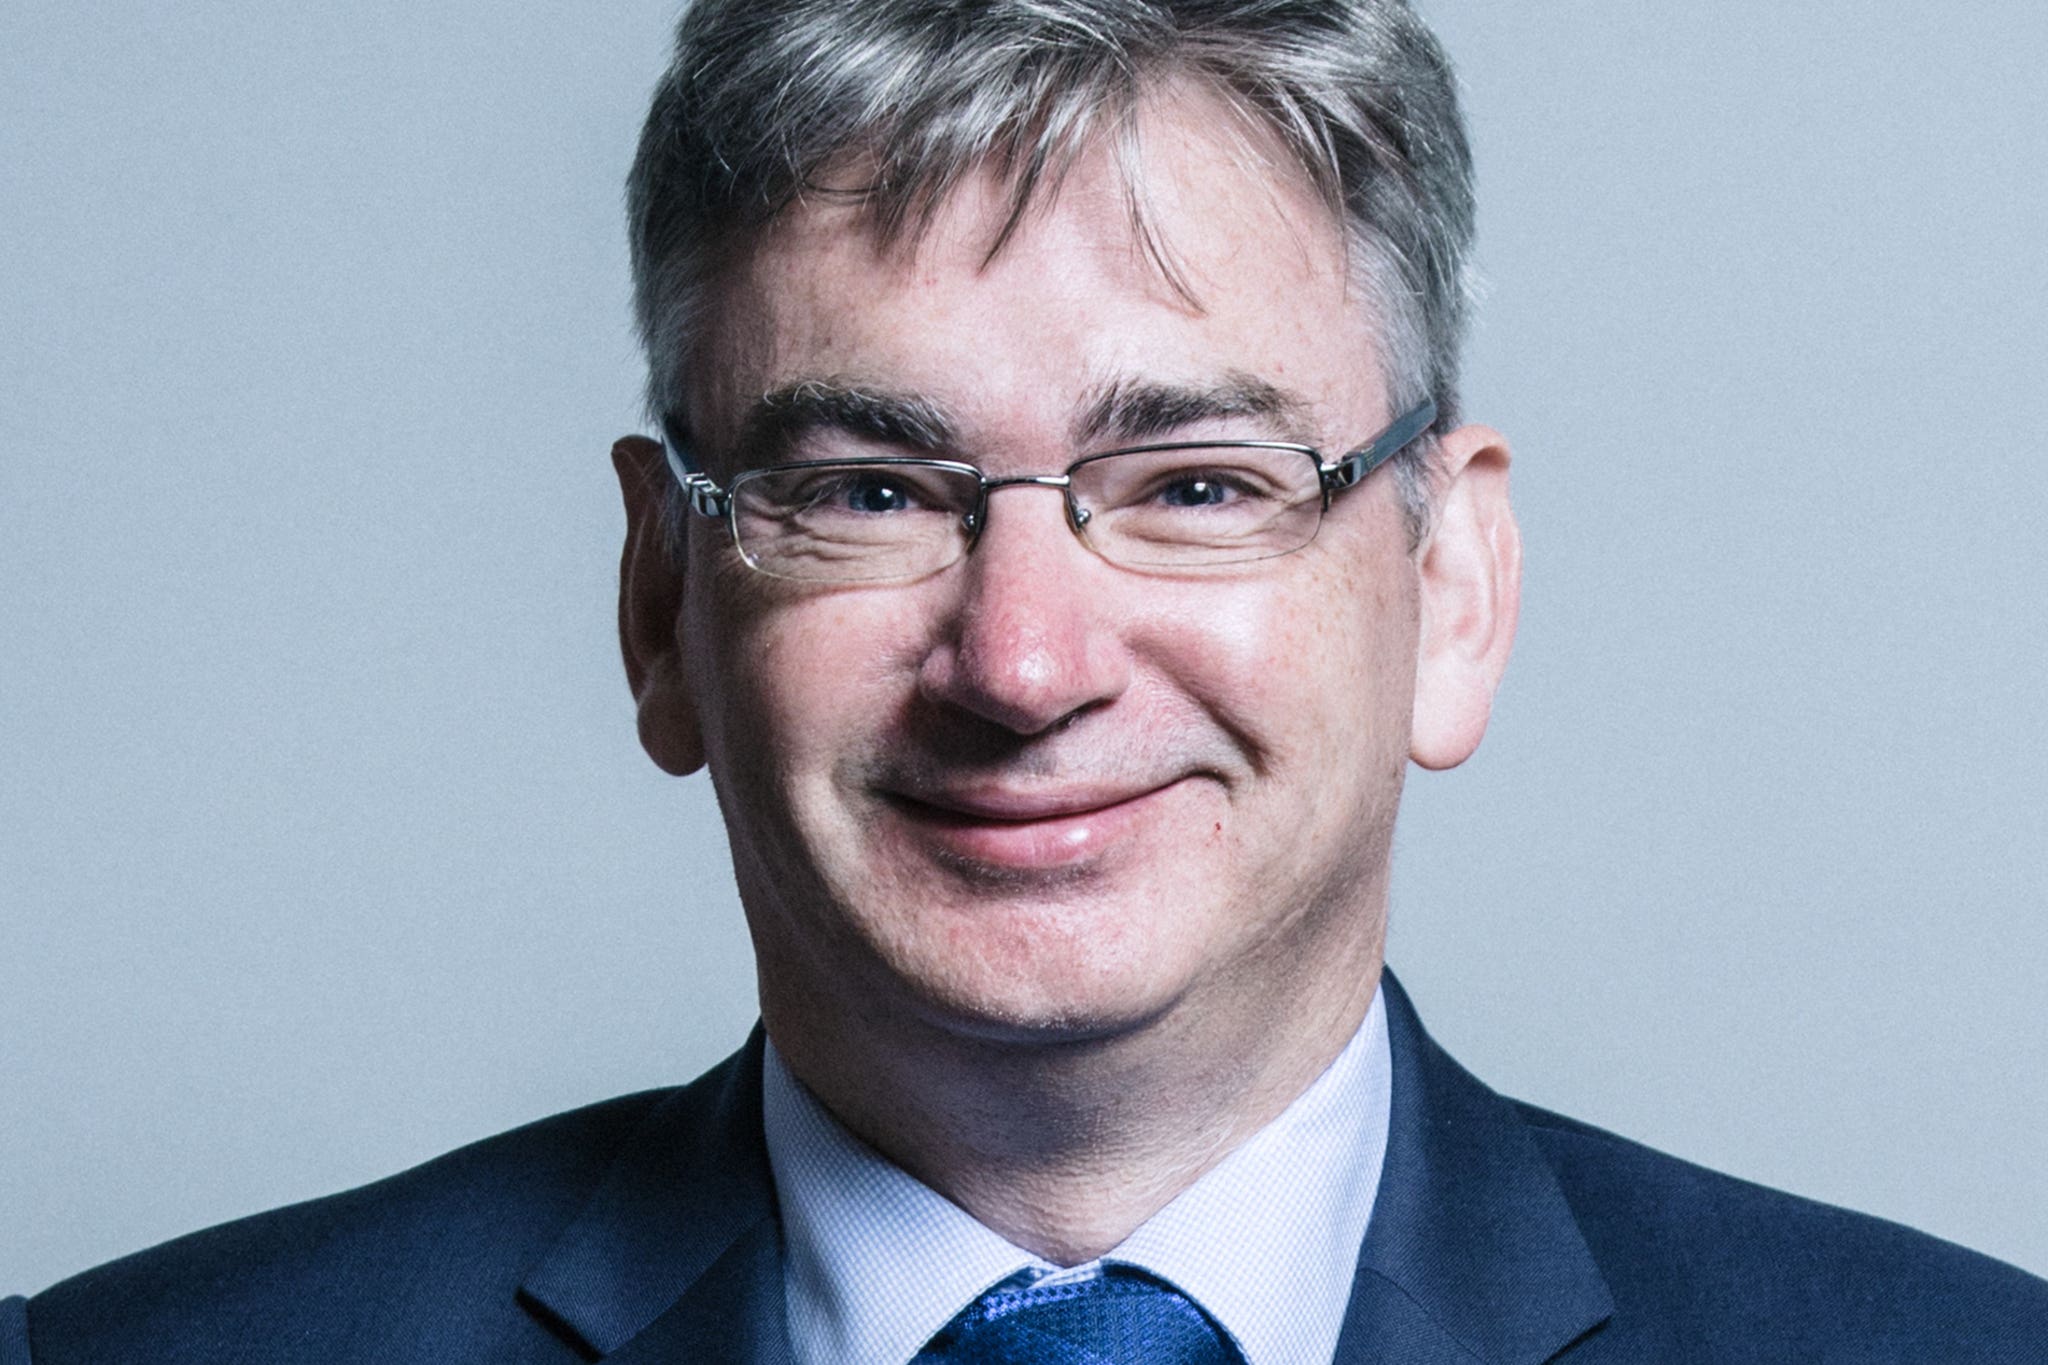 Julian Knight has represented Solihull in the West Midlands since 2015